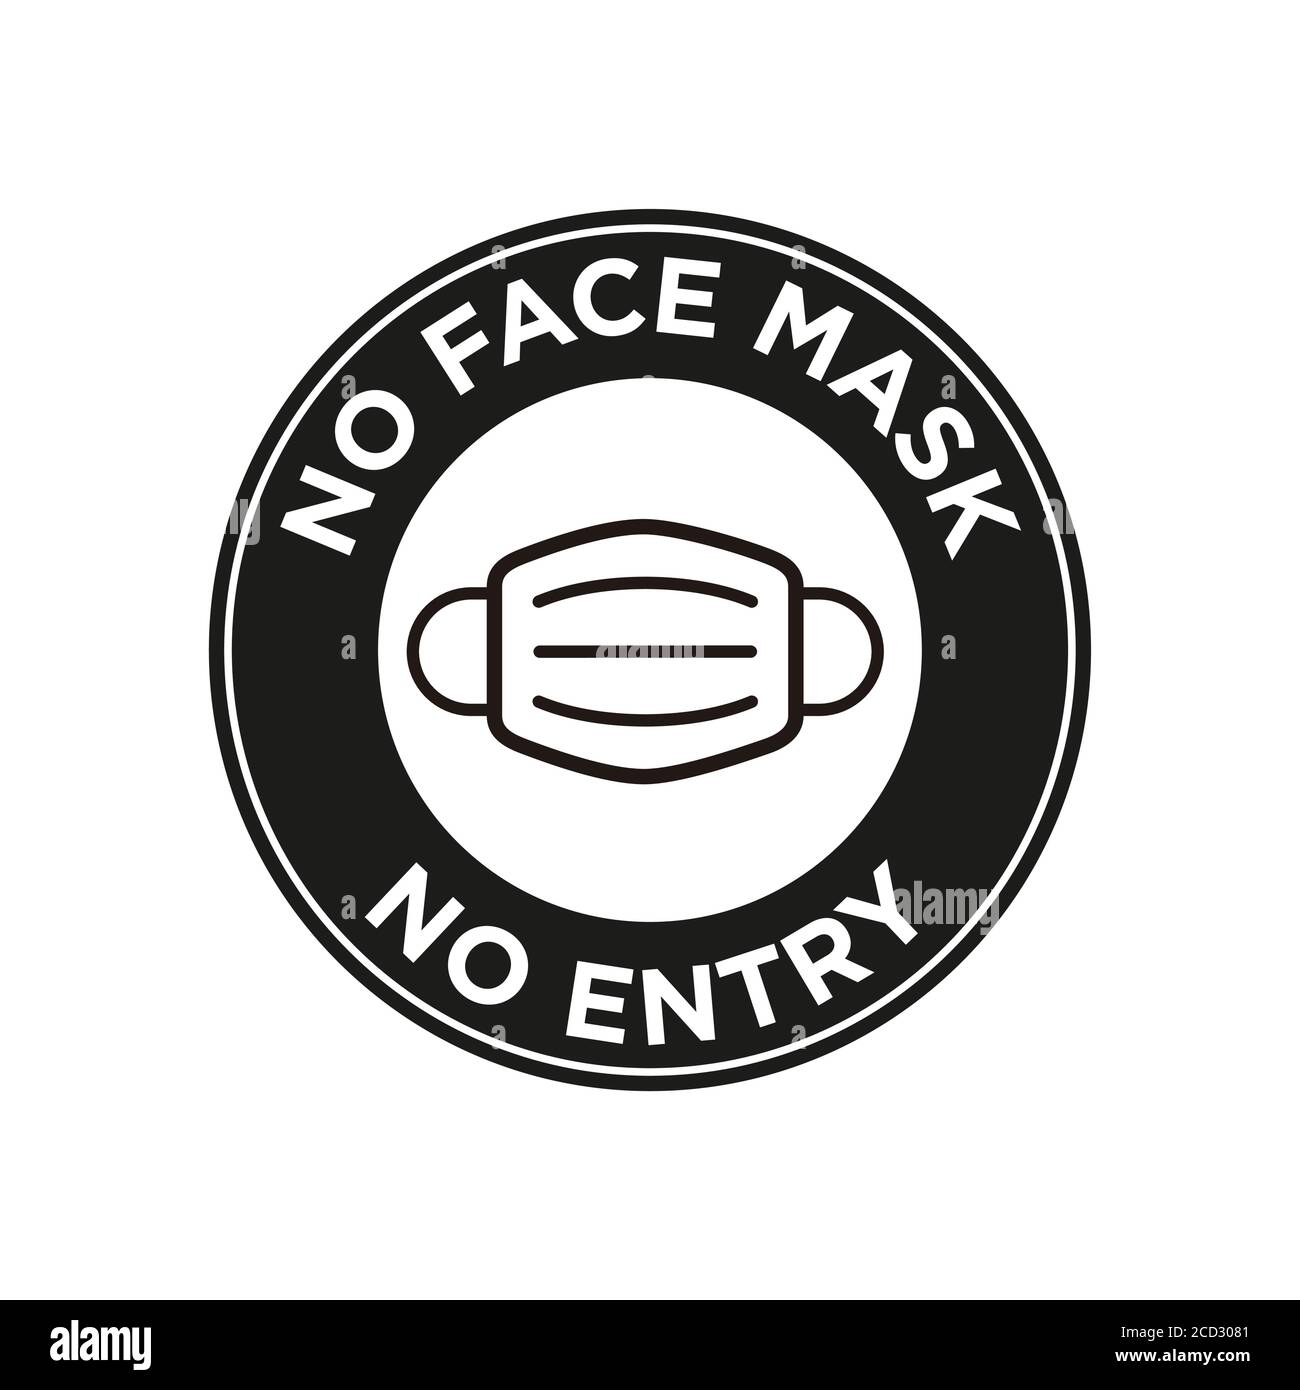 No face mask no entry icon. Round and black symbol about mandatory use of face mask to prevent Coronavirus. Stock Vector